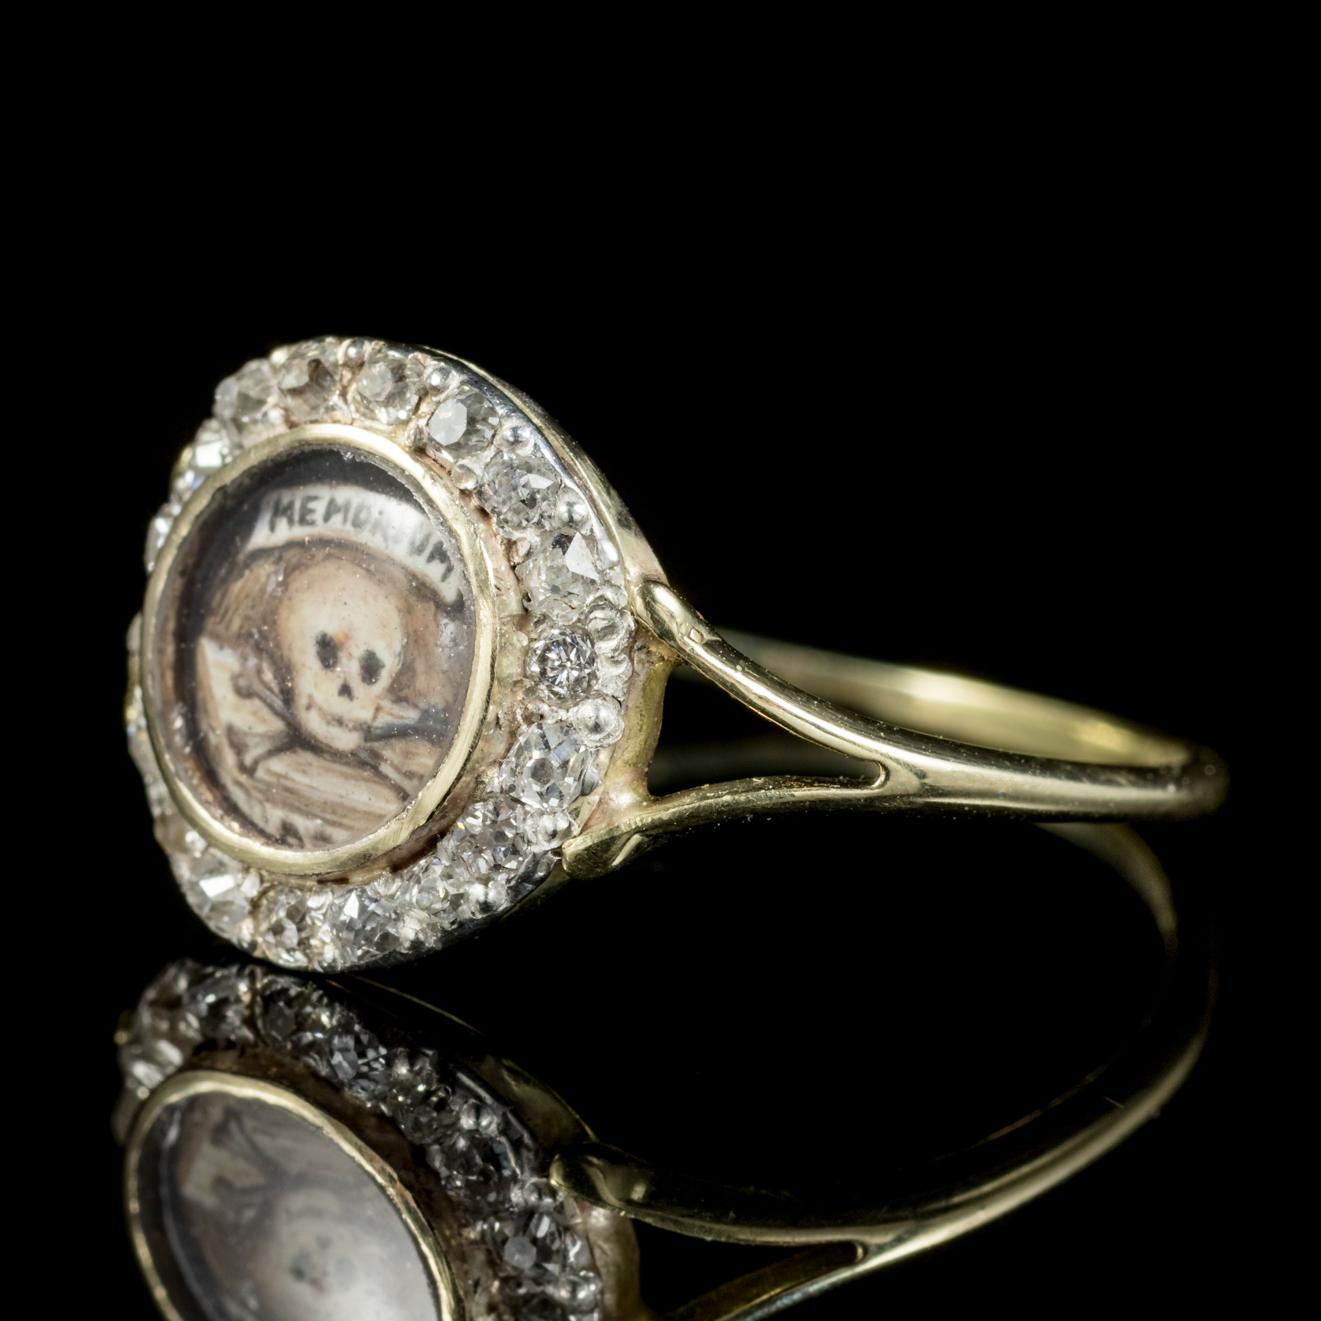 This remarkable Memento Mori ring features a Crystal window with a hand painted Enamel skull and crossbones underneath with the words ‘Memorium’ written above. 

Memento mori is Latin for ‘Remember that you have to die’. During the 17th Century